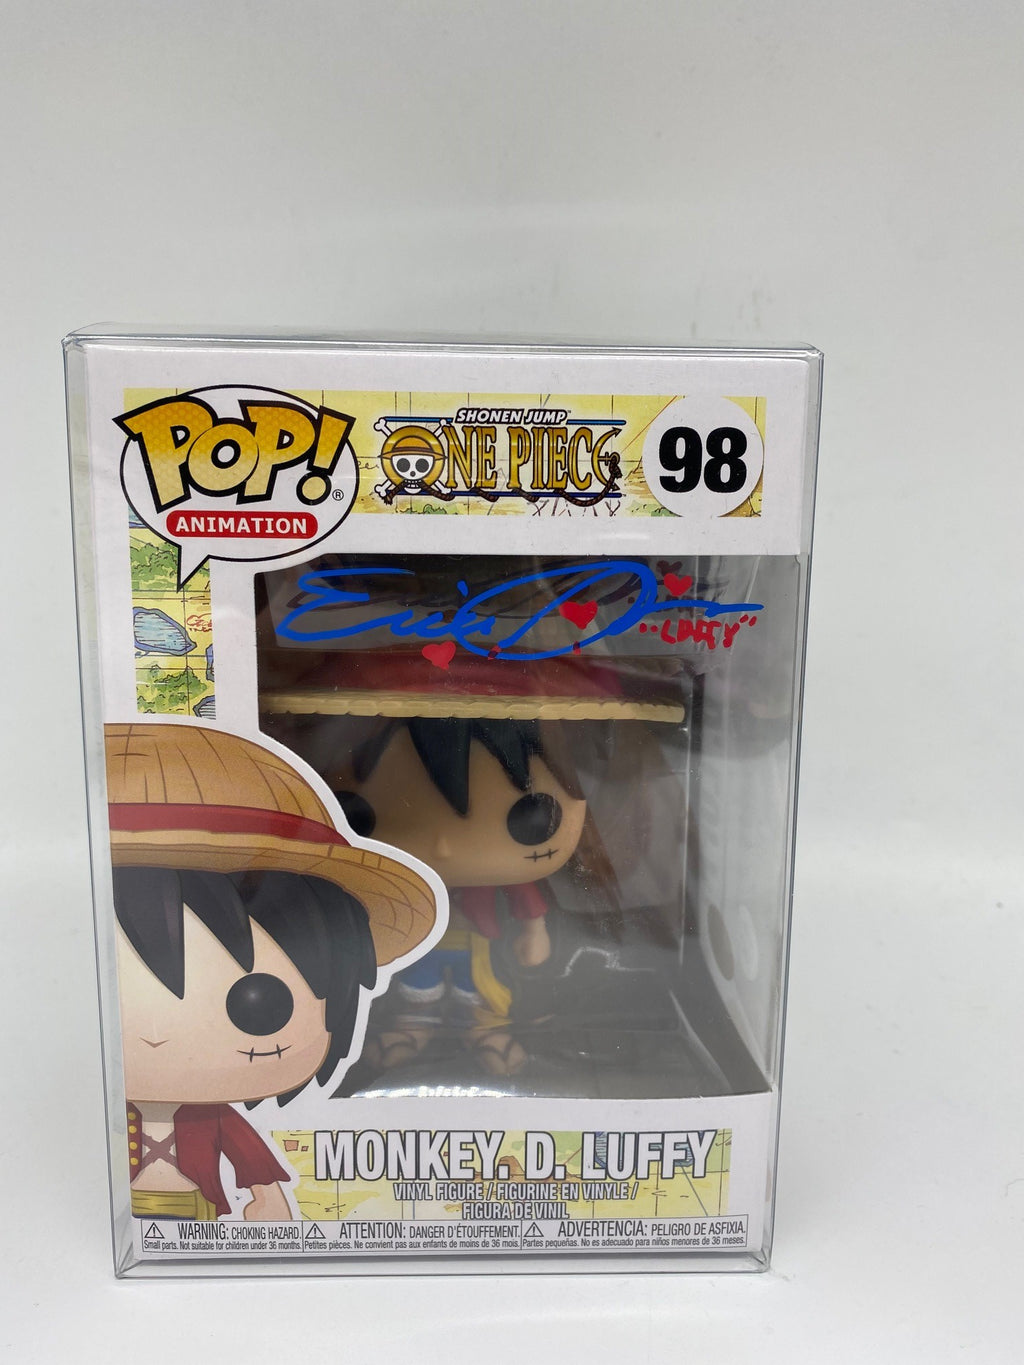 Signed One Piece Monkey D. Luffy #98